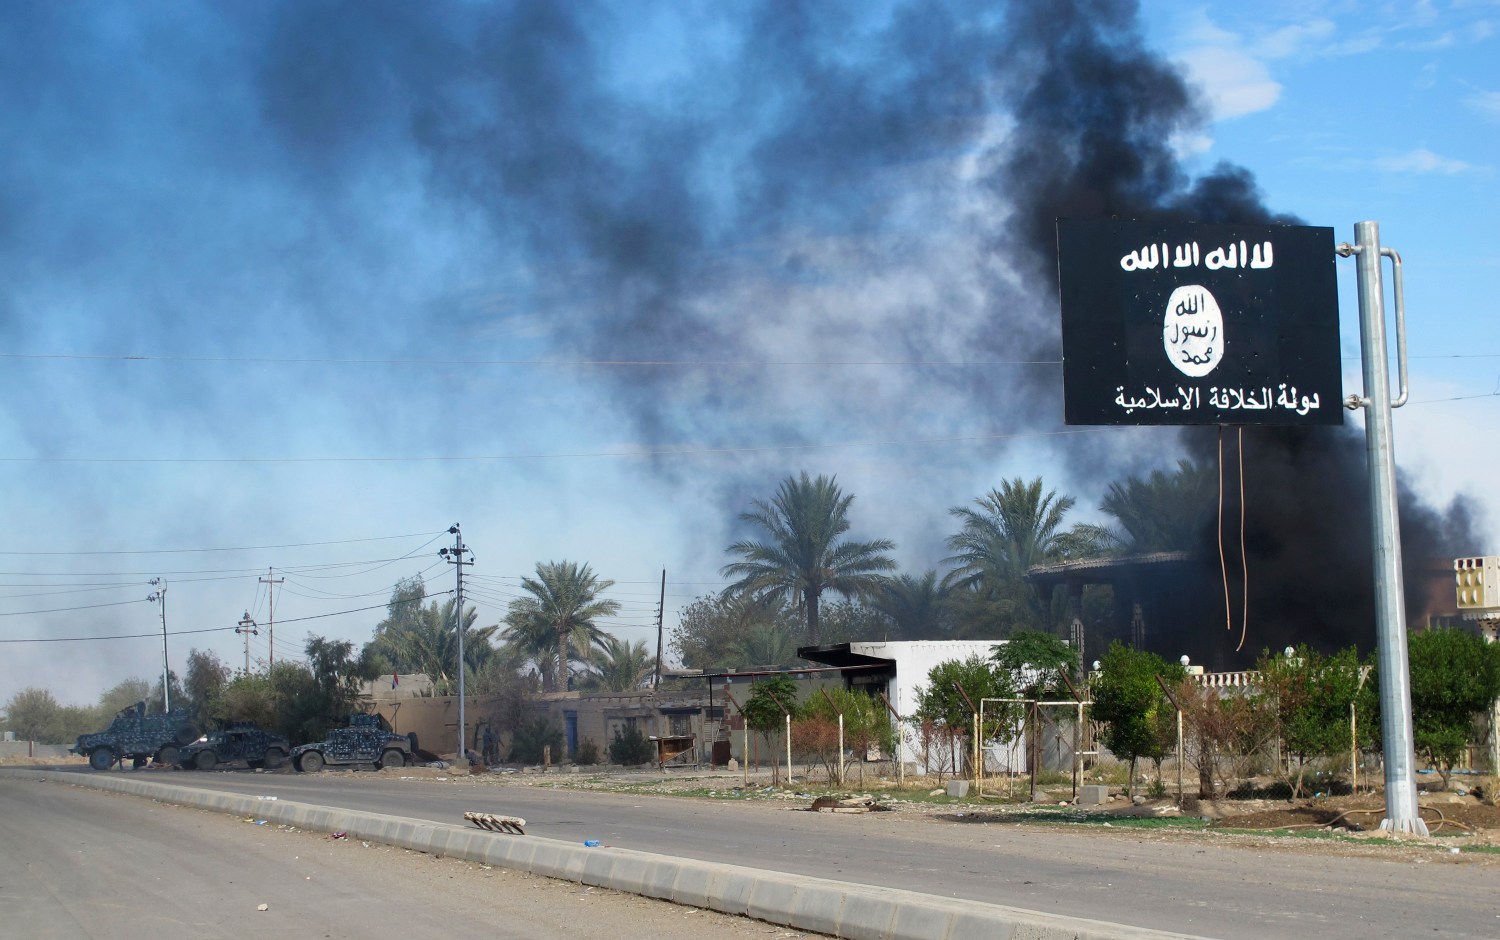 Smoke raises behind an Islamic State flag after Iraqi security forces and Shiite fighters took control of Saadiya in Diyala province from Islamist State militants, November 24, 2014. Iraqi forces said on Sunday they retook two towns north of Baghdad from Islamic State fighters, driving them from strongholds they had held for months and clearing a main road from the capital to Iran. There was no independent confirmation that the army, Shi'ite militia and Kurdish peshmerga forces had completely retaken Jalawla and Saadiya, about 115 km (70 miles) northeast of Baghdad. Many residents fled the violence long ago. At least 23 peshmerga and militia fighters were killed and dozens were wounded in Sunday's fighting, medical and army sources said.  REUTERS/Stringer (IRAQ - Tags: CIVIL UNREST CONFLICT MILITARY TPX IMAGES OF THE DAY) - GM1EABP0BT301